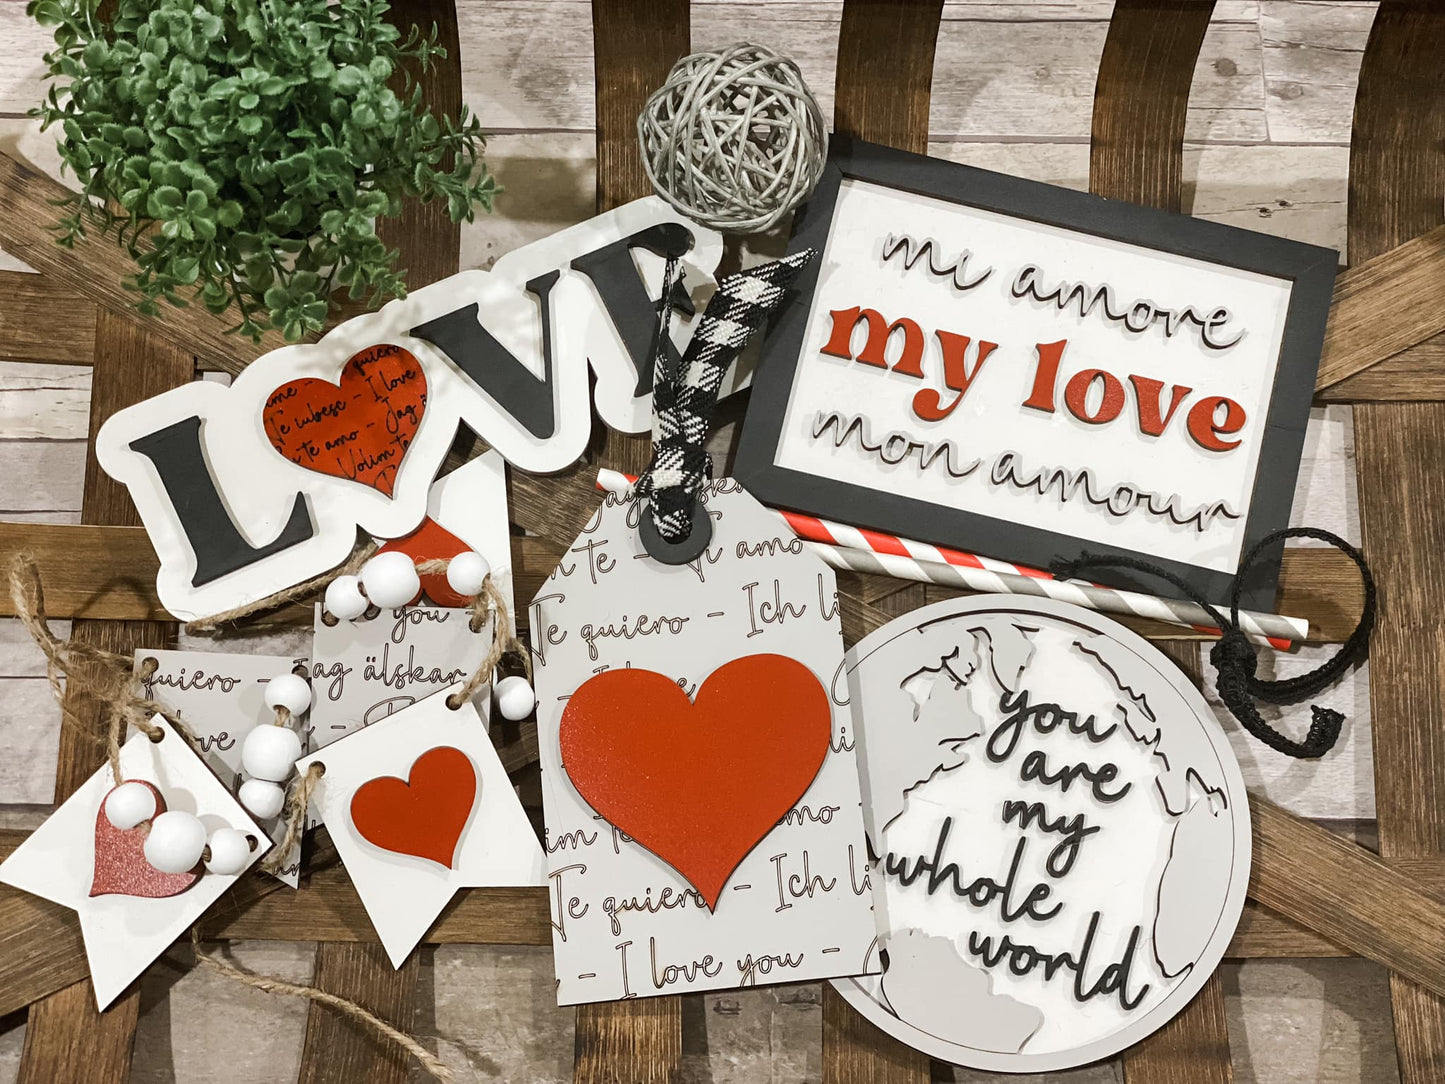 3D Tiered Tray Decor - Valentines Day - You are my whole world